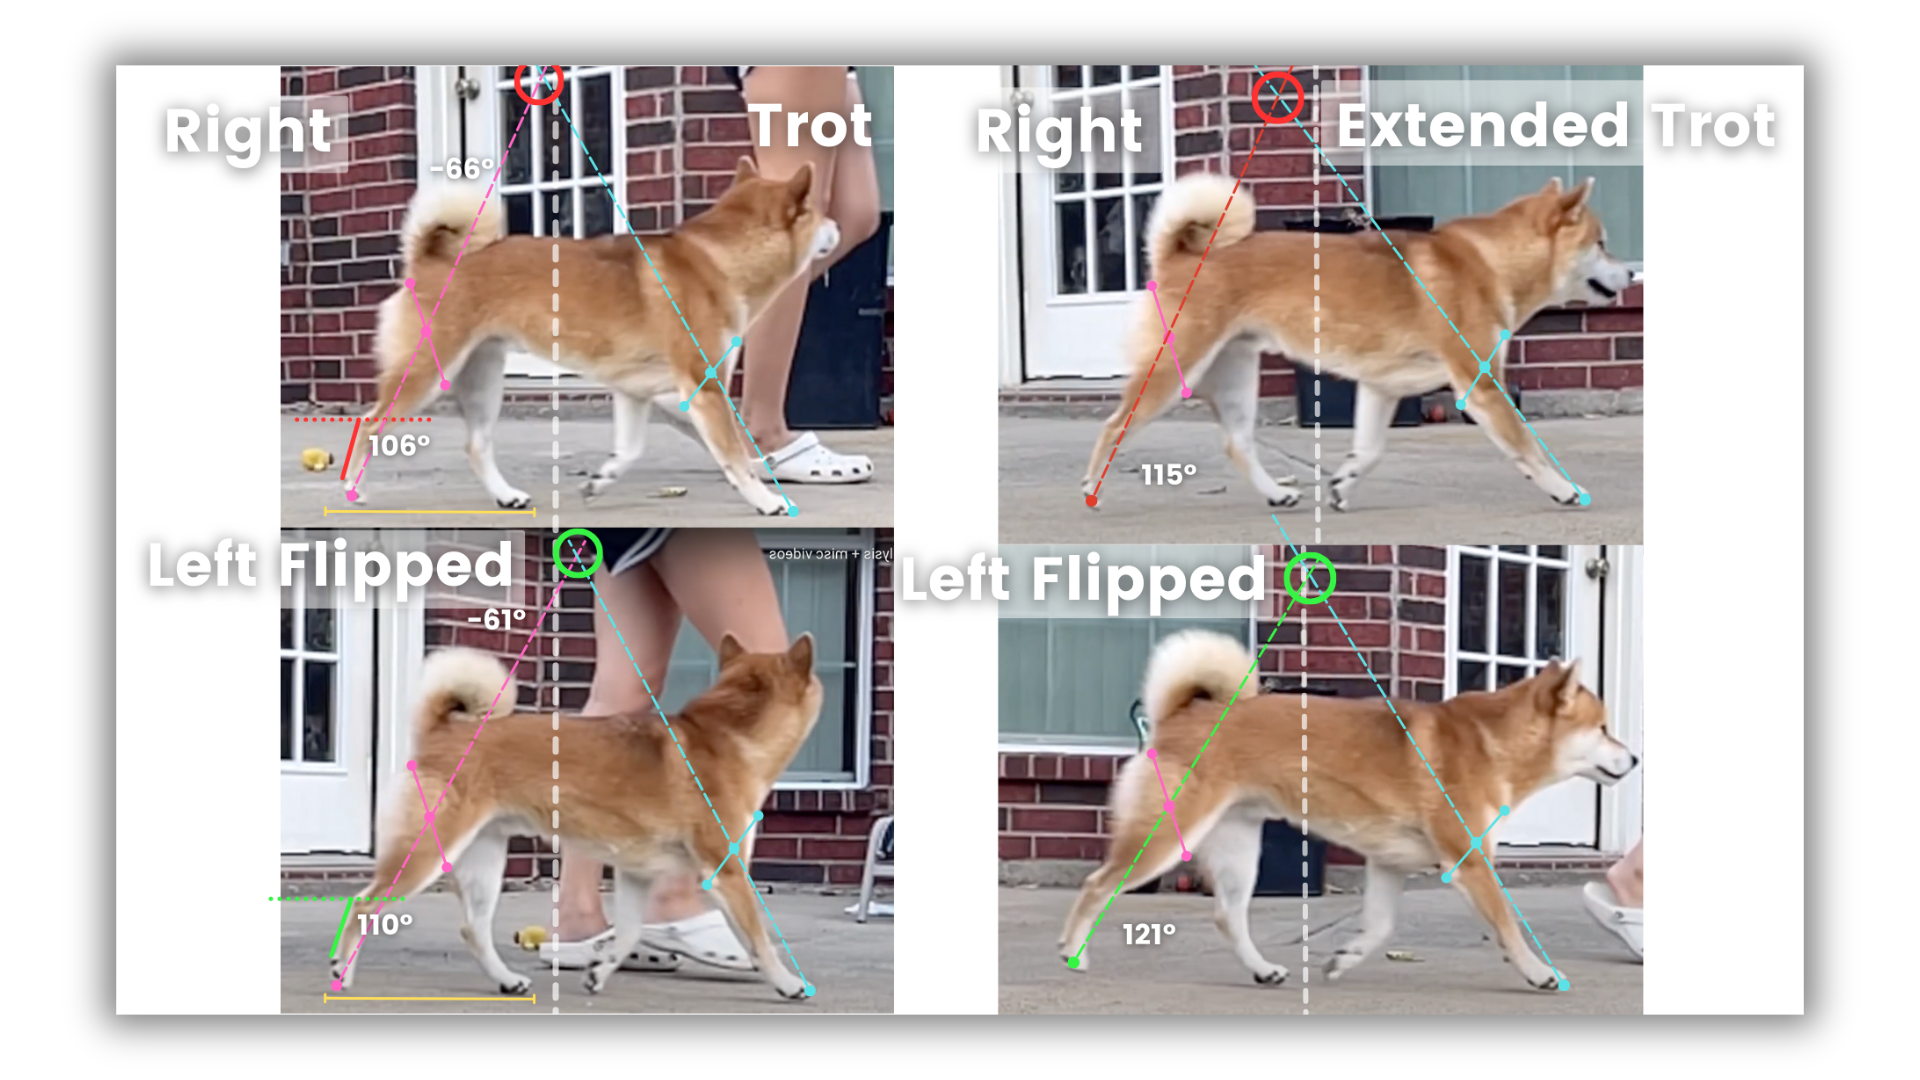 Gait analysis images showing the trot shot from the side.